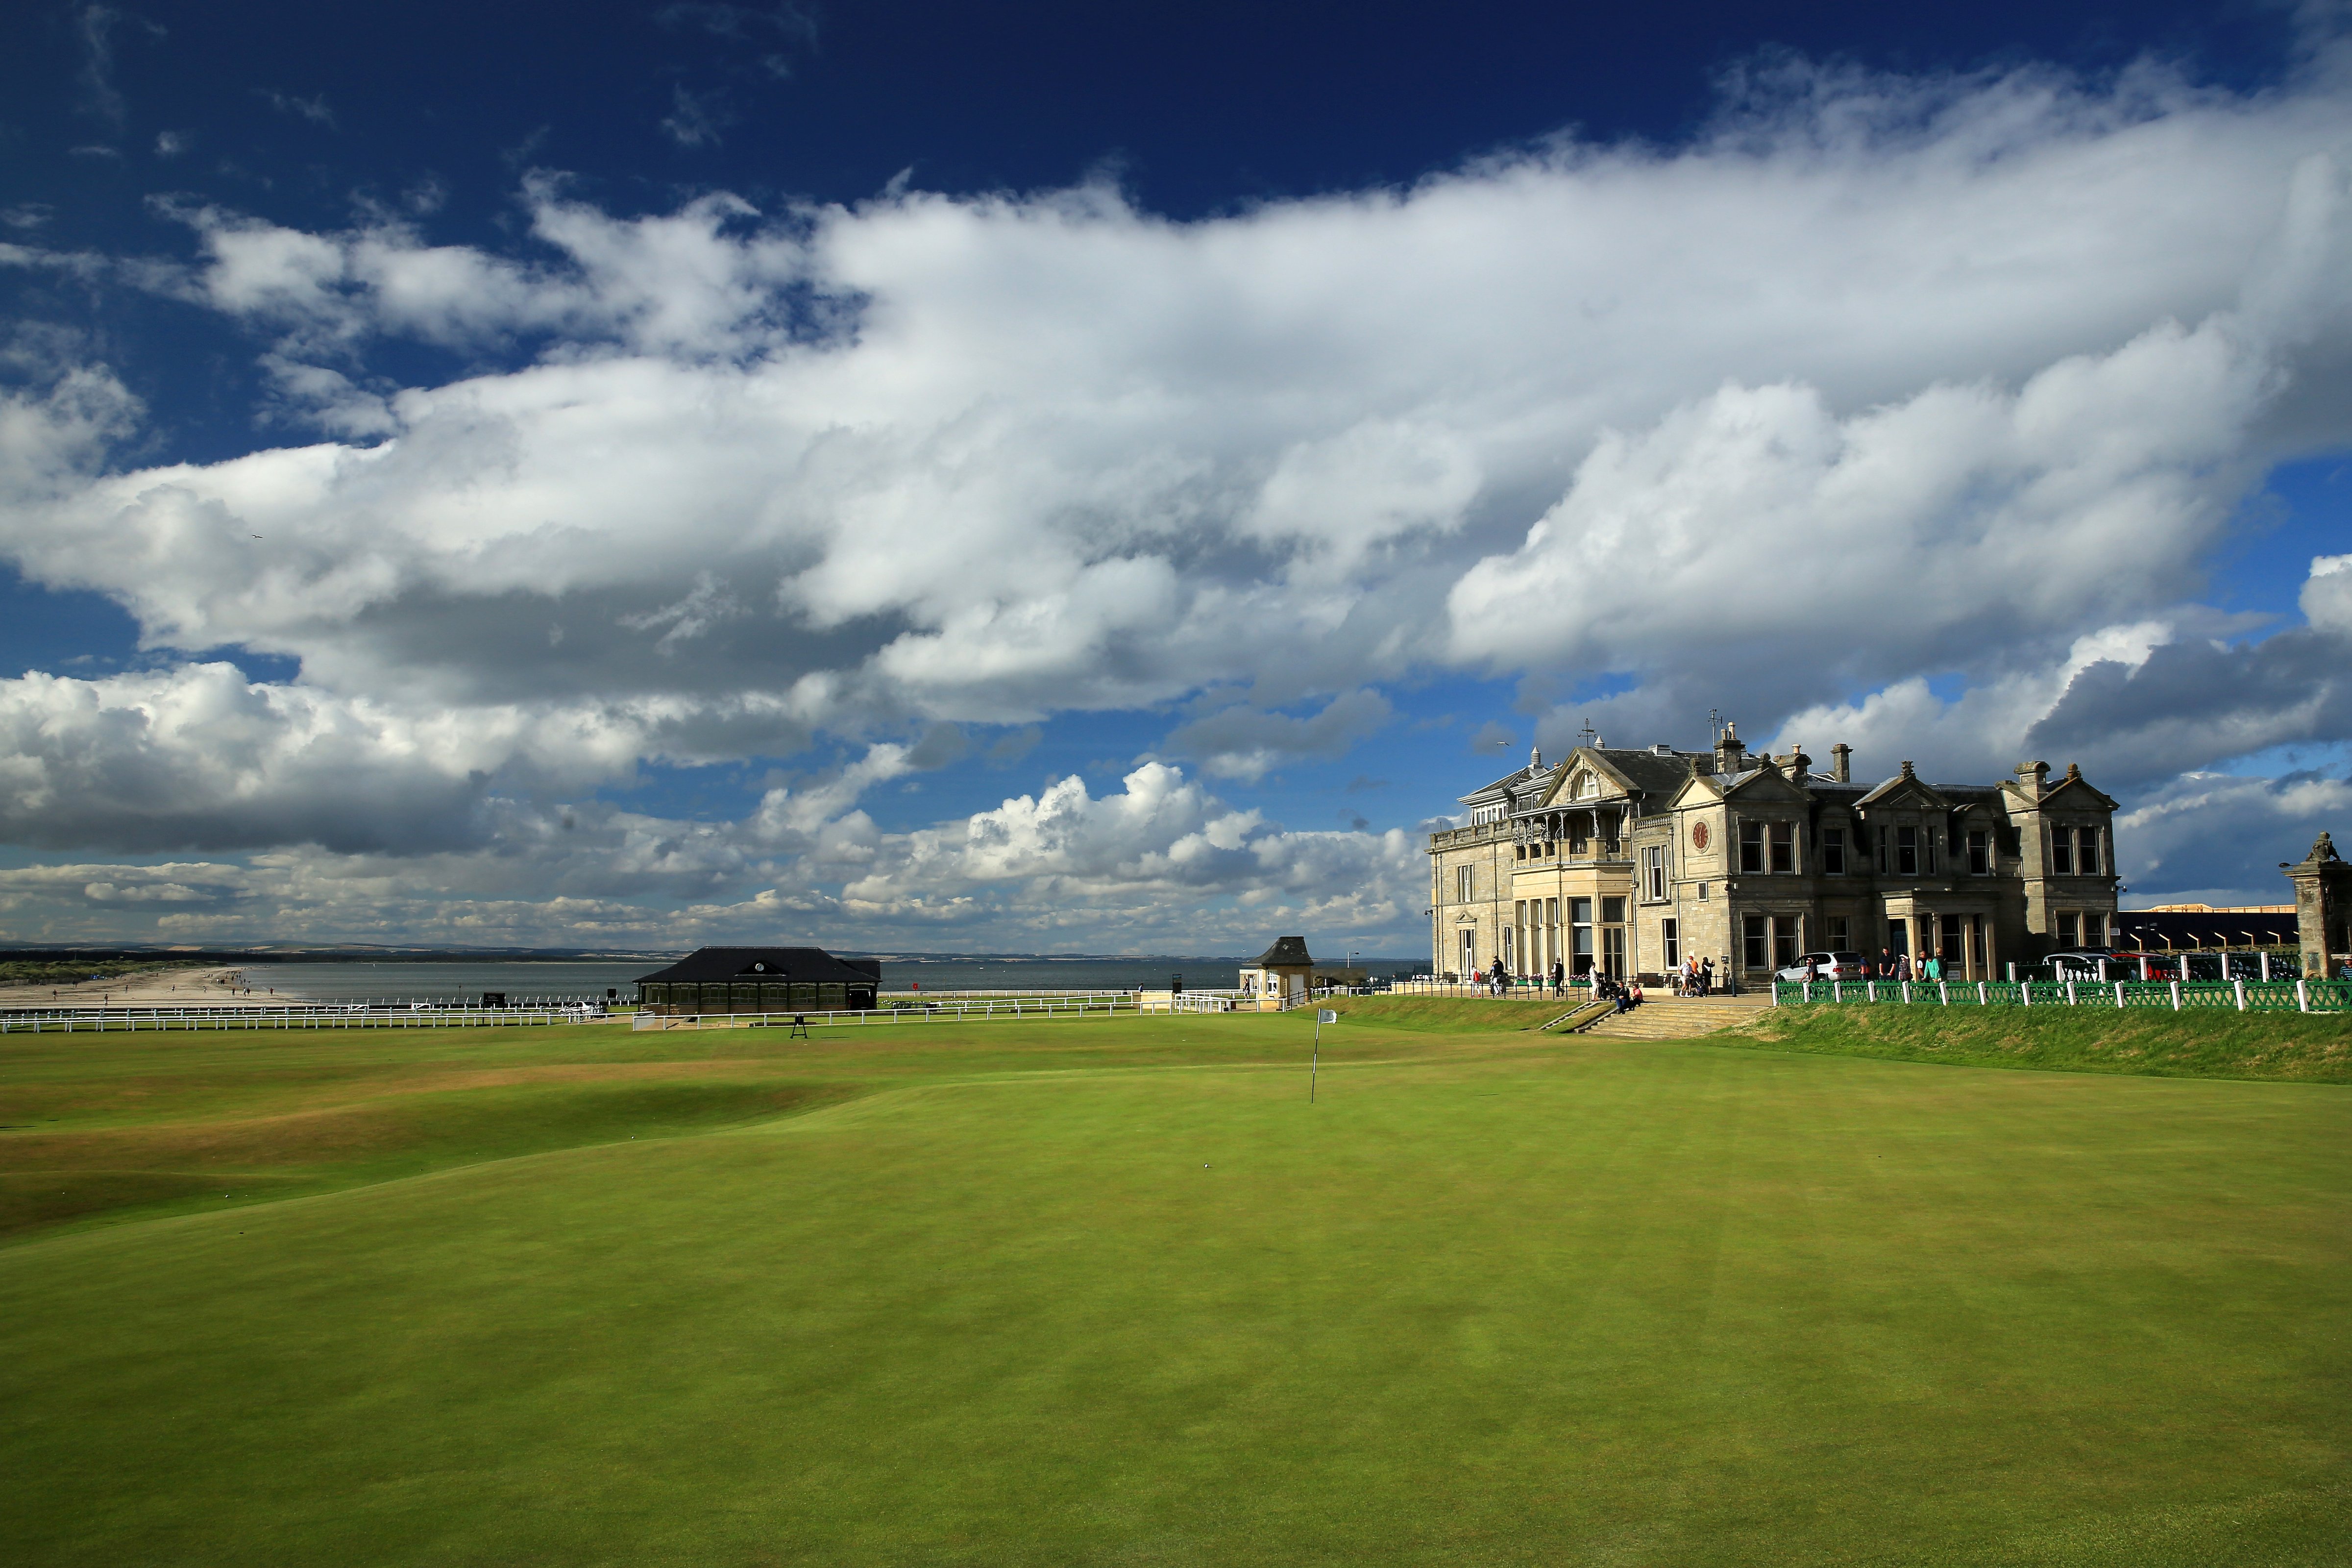 The clubhouse of the Royal and Ancient Golf Club of St Andrews, with the 18th green and the first tee on the Old Course at St Andrews venue for The Open Championship in 2015, on July 29, 2014 in St Andrews, Scotland (David Cannon—Getty Images)